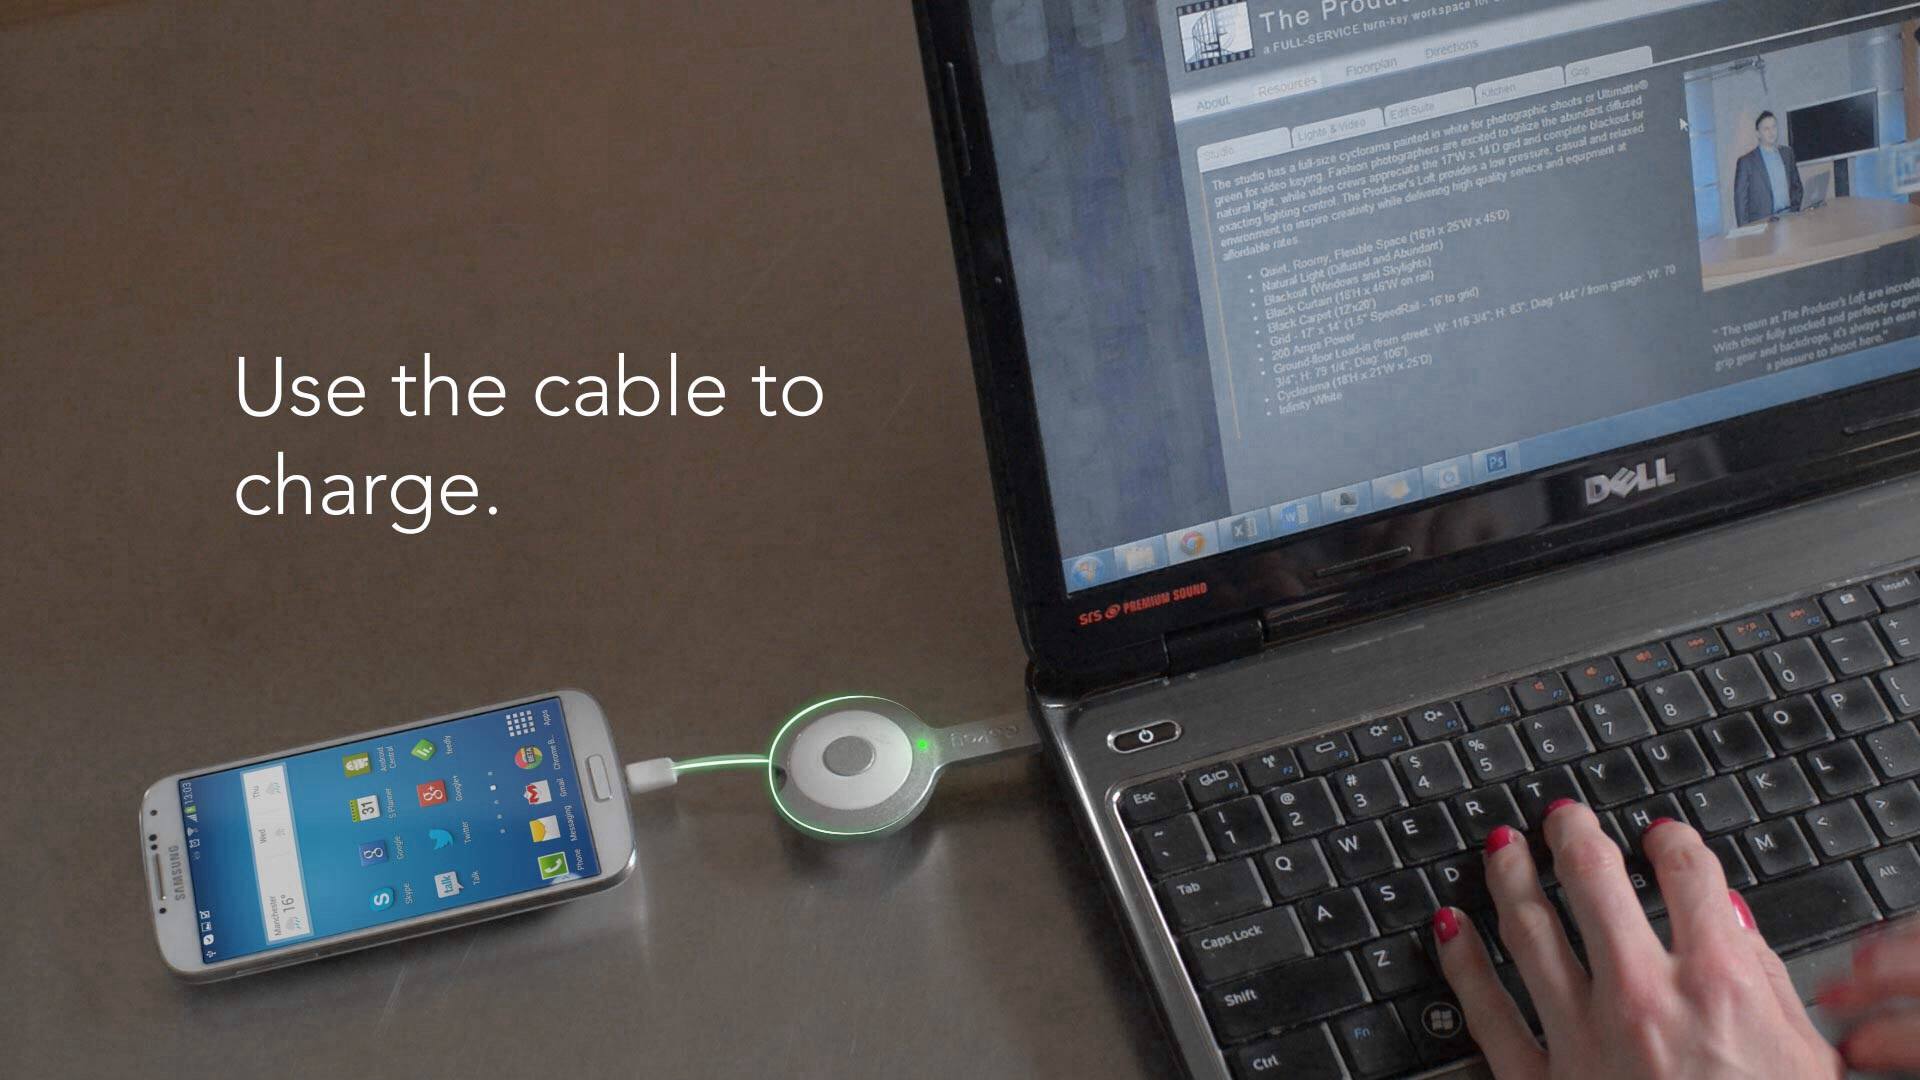 GOkey: The 4-in-1 Keychain That Features As A Charger, Powerbank And Locator